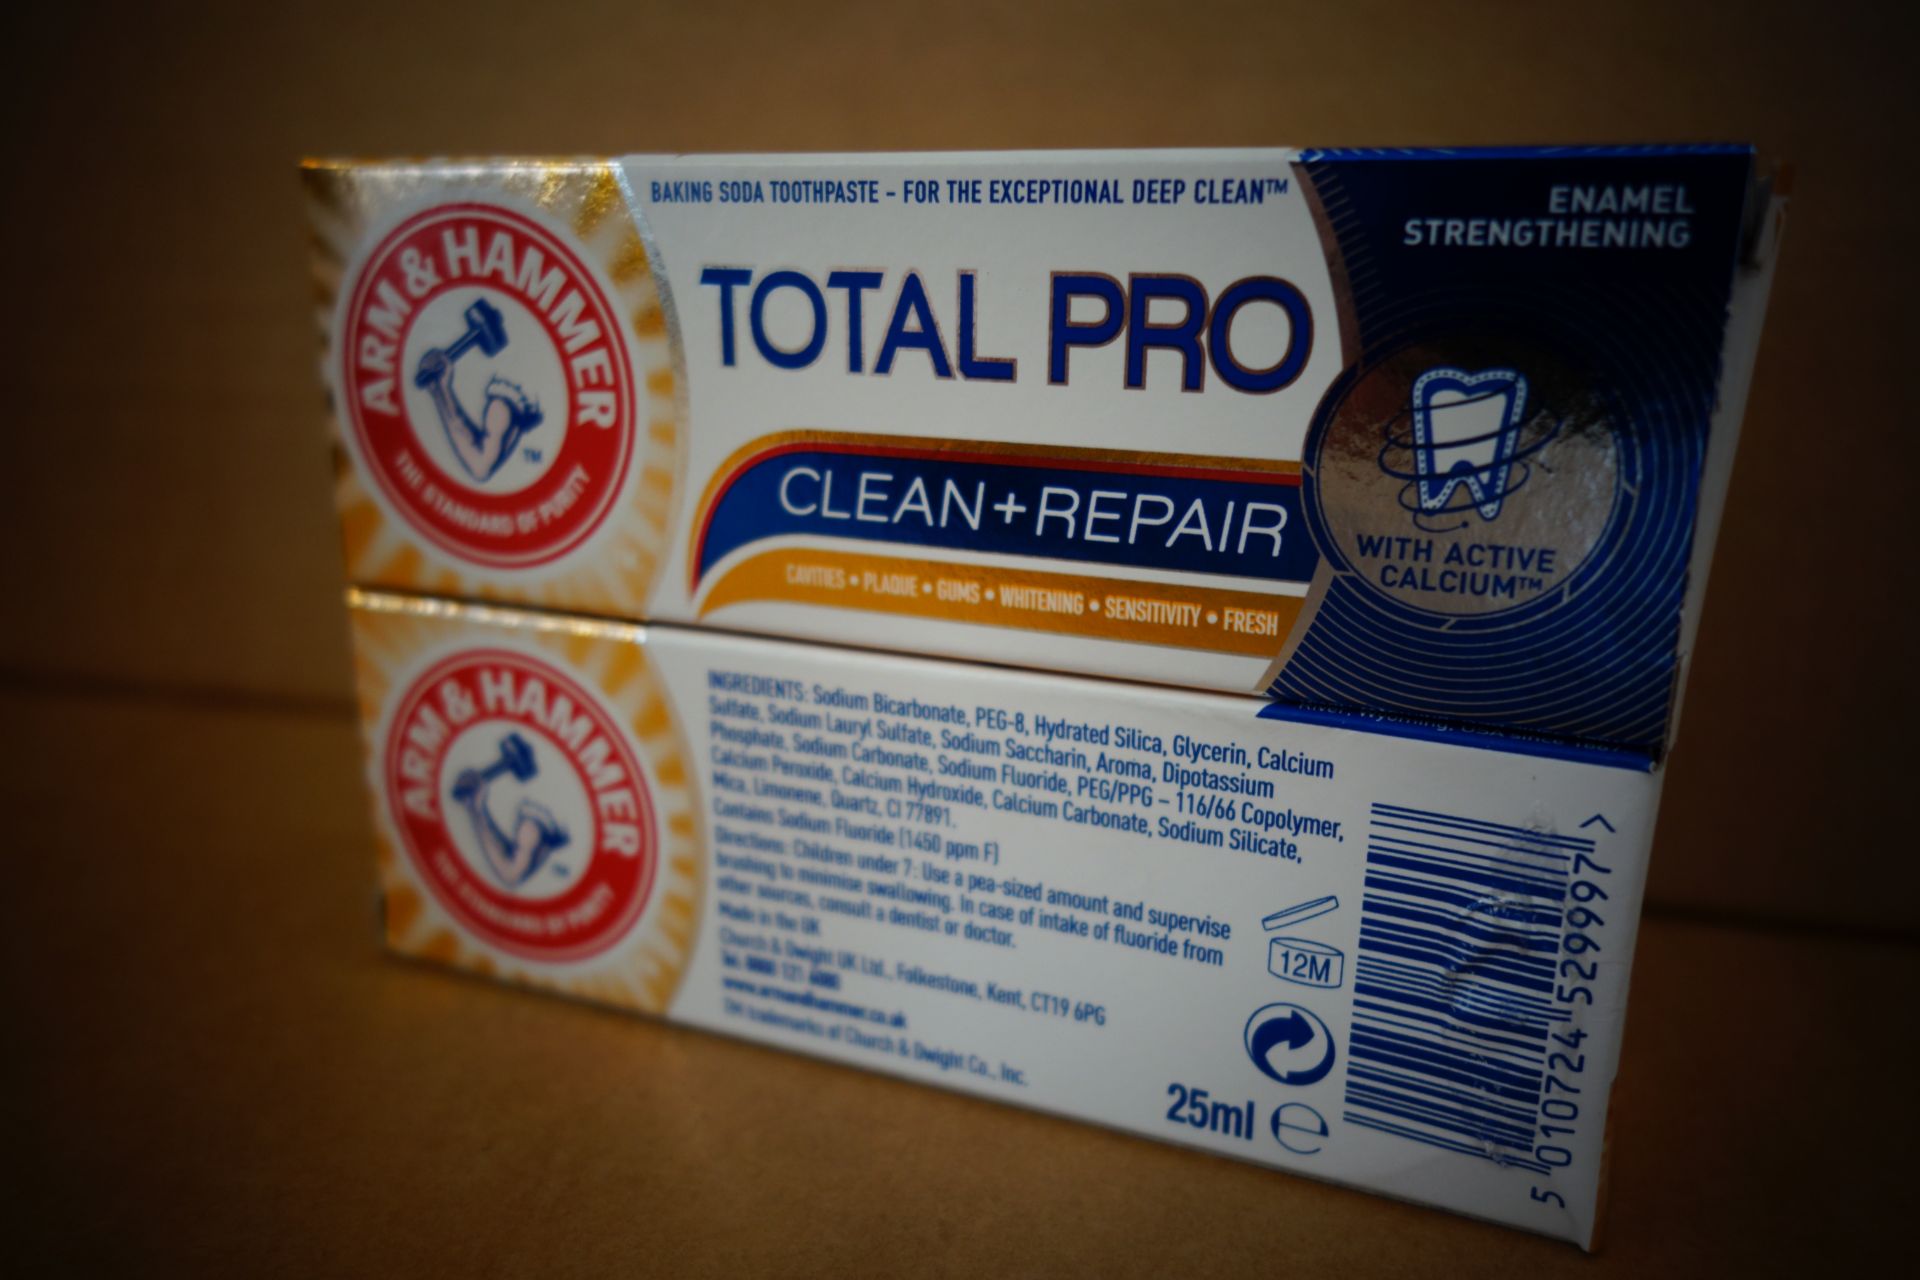 144 x Arm & Hammer Total Pro Clean + Repair Toothpaste 25ml. Suitable for use up to 12 months from - Image 3 of 3